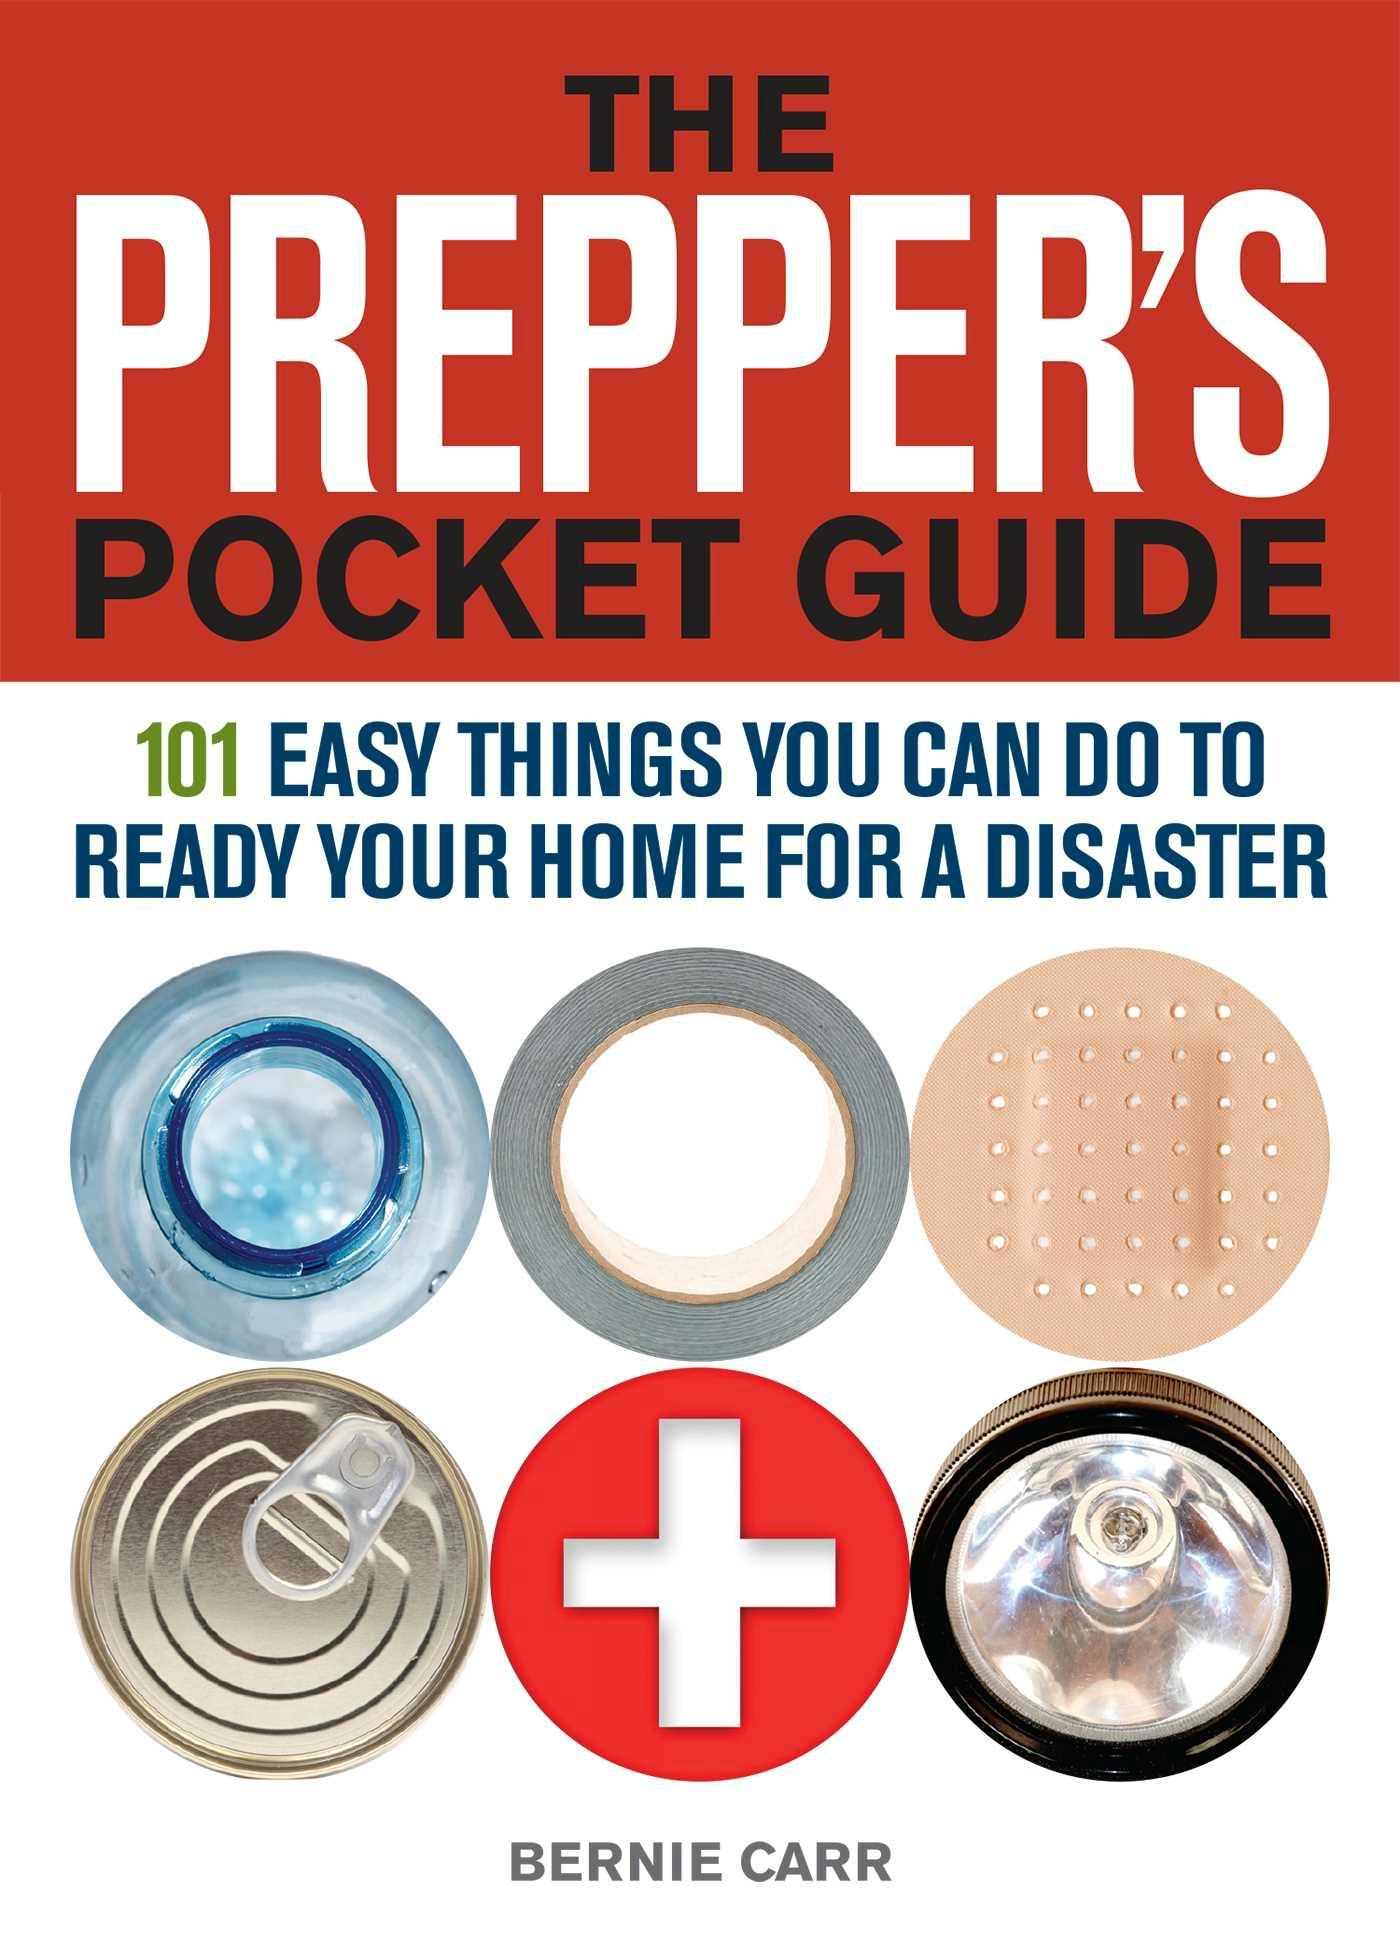 The Prepper's Pocket Guide: 101 Easy Things You Can Do to Ready Your Home for a Disaster - Bernie Carr